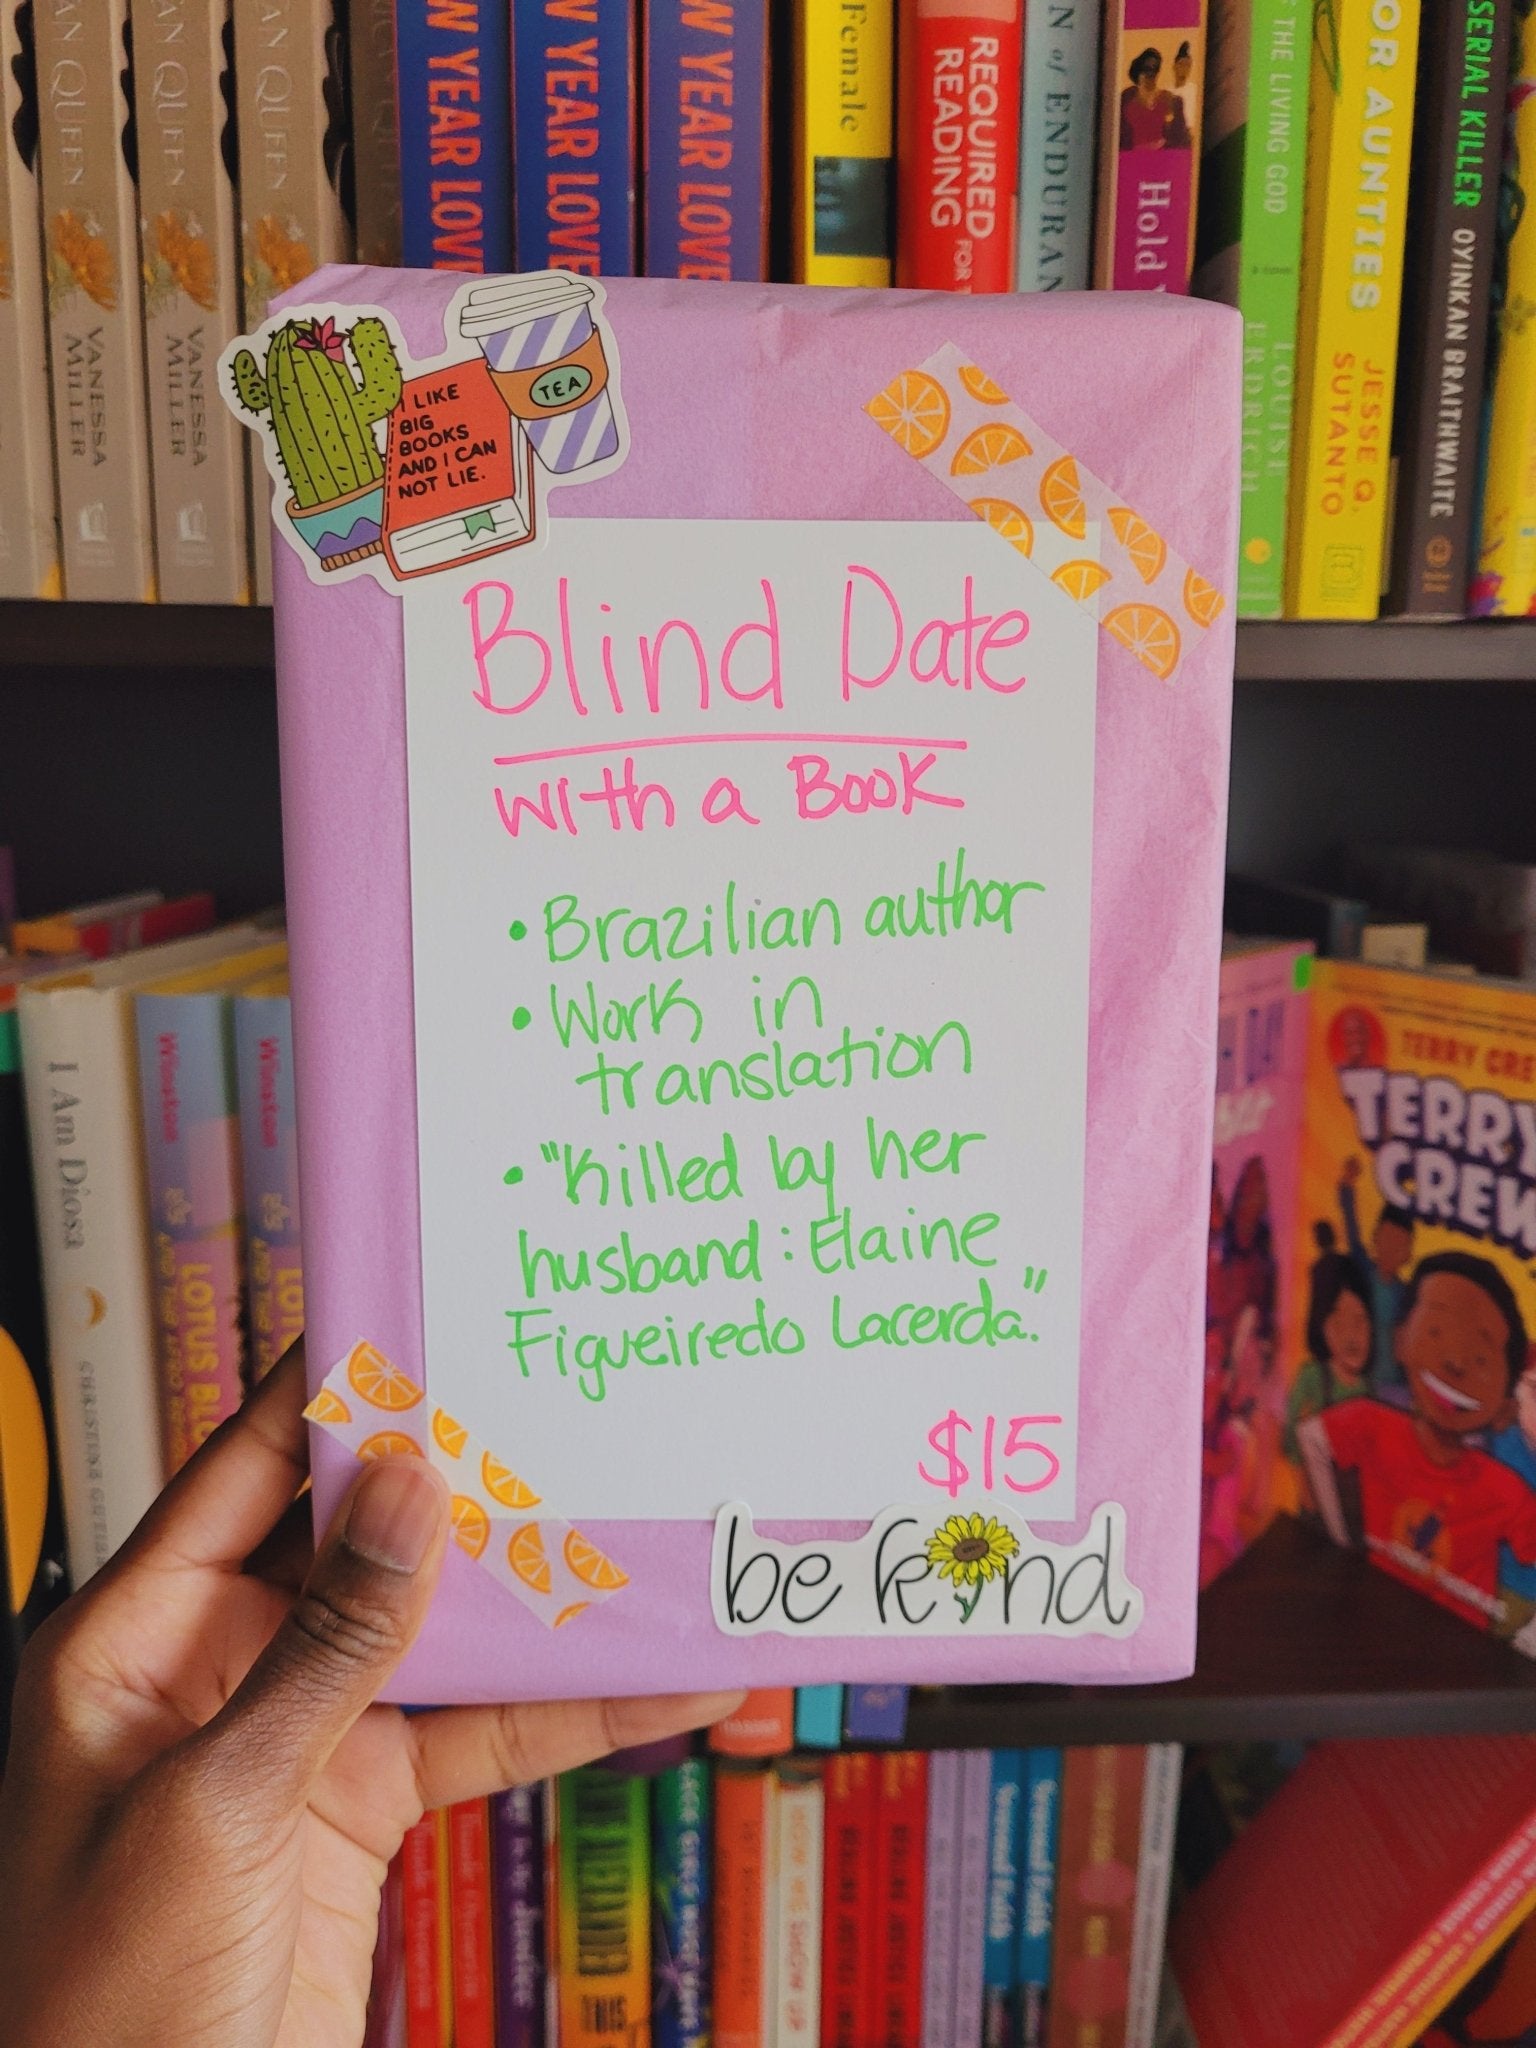 Blind Date with a Book (Women's History Month) - 9781632063465 - Tuma's Books - Tuma's Books